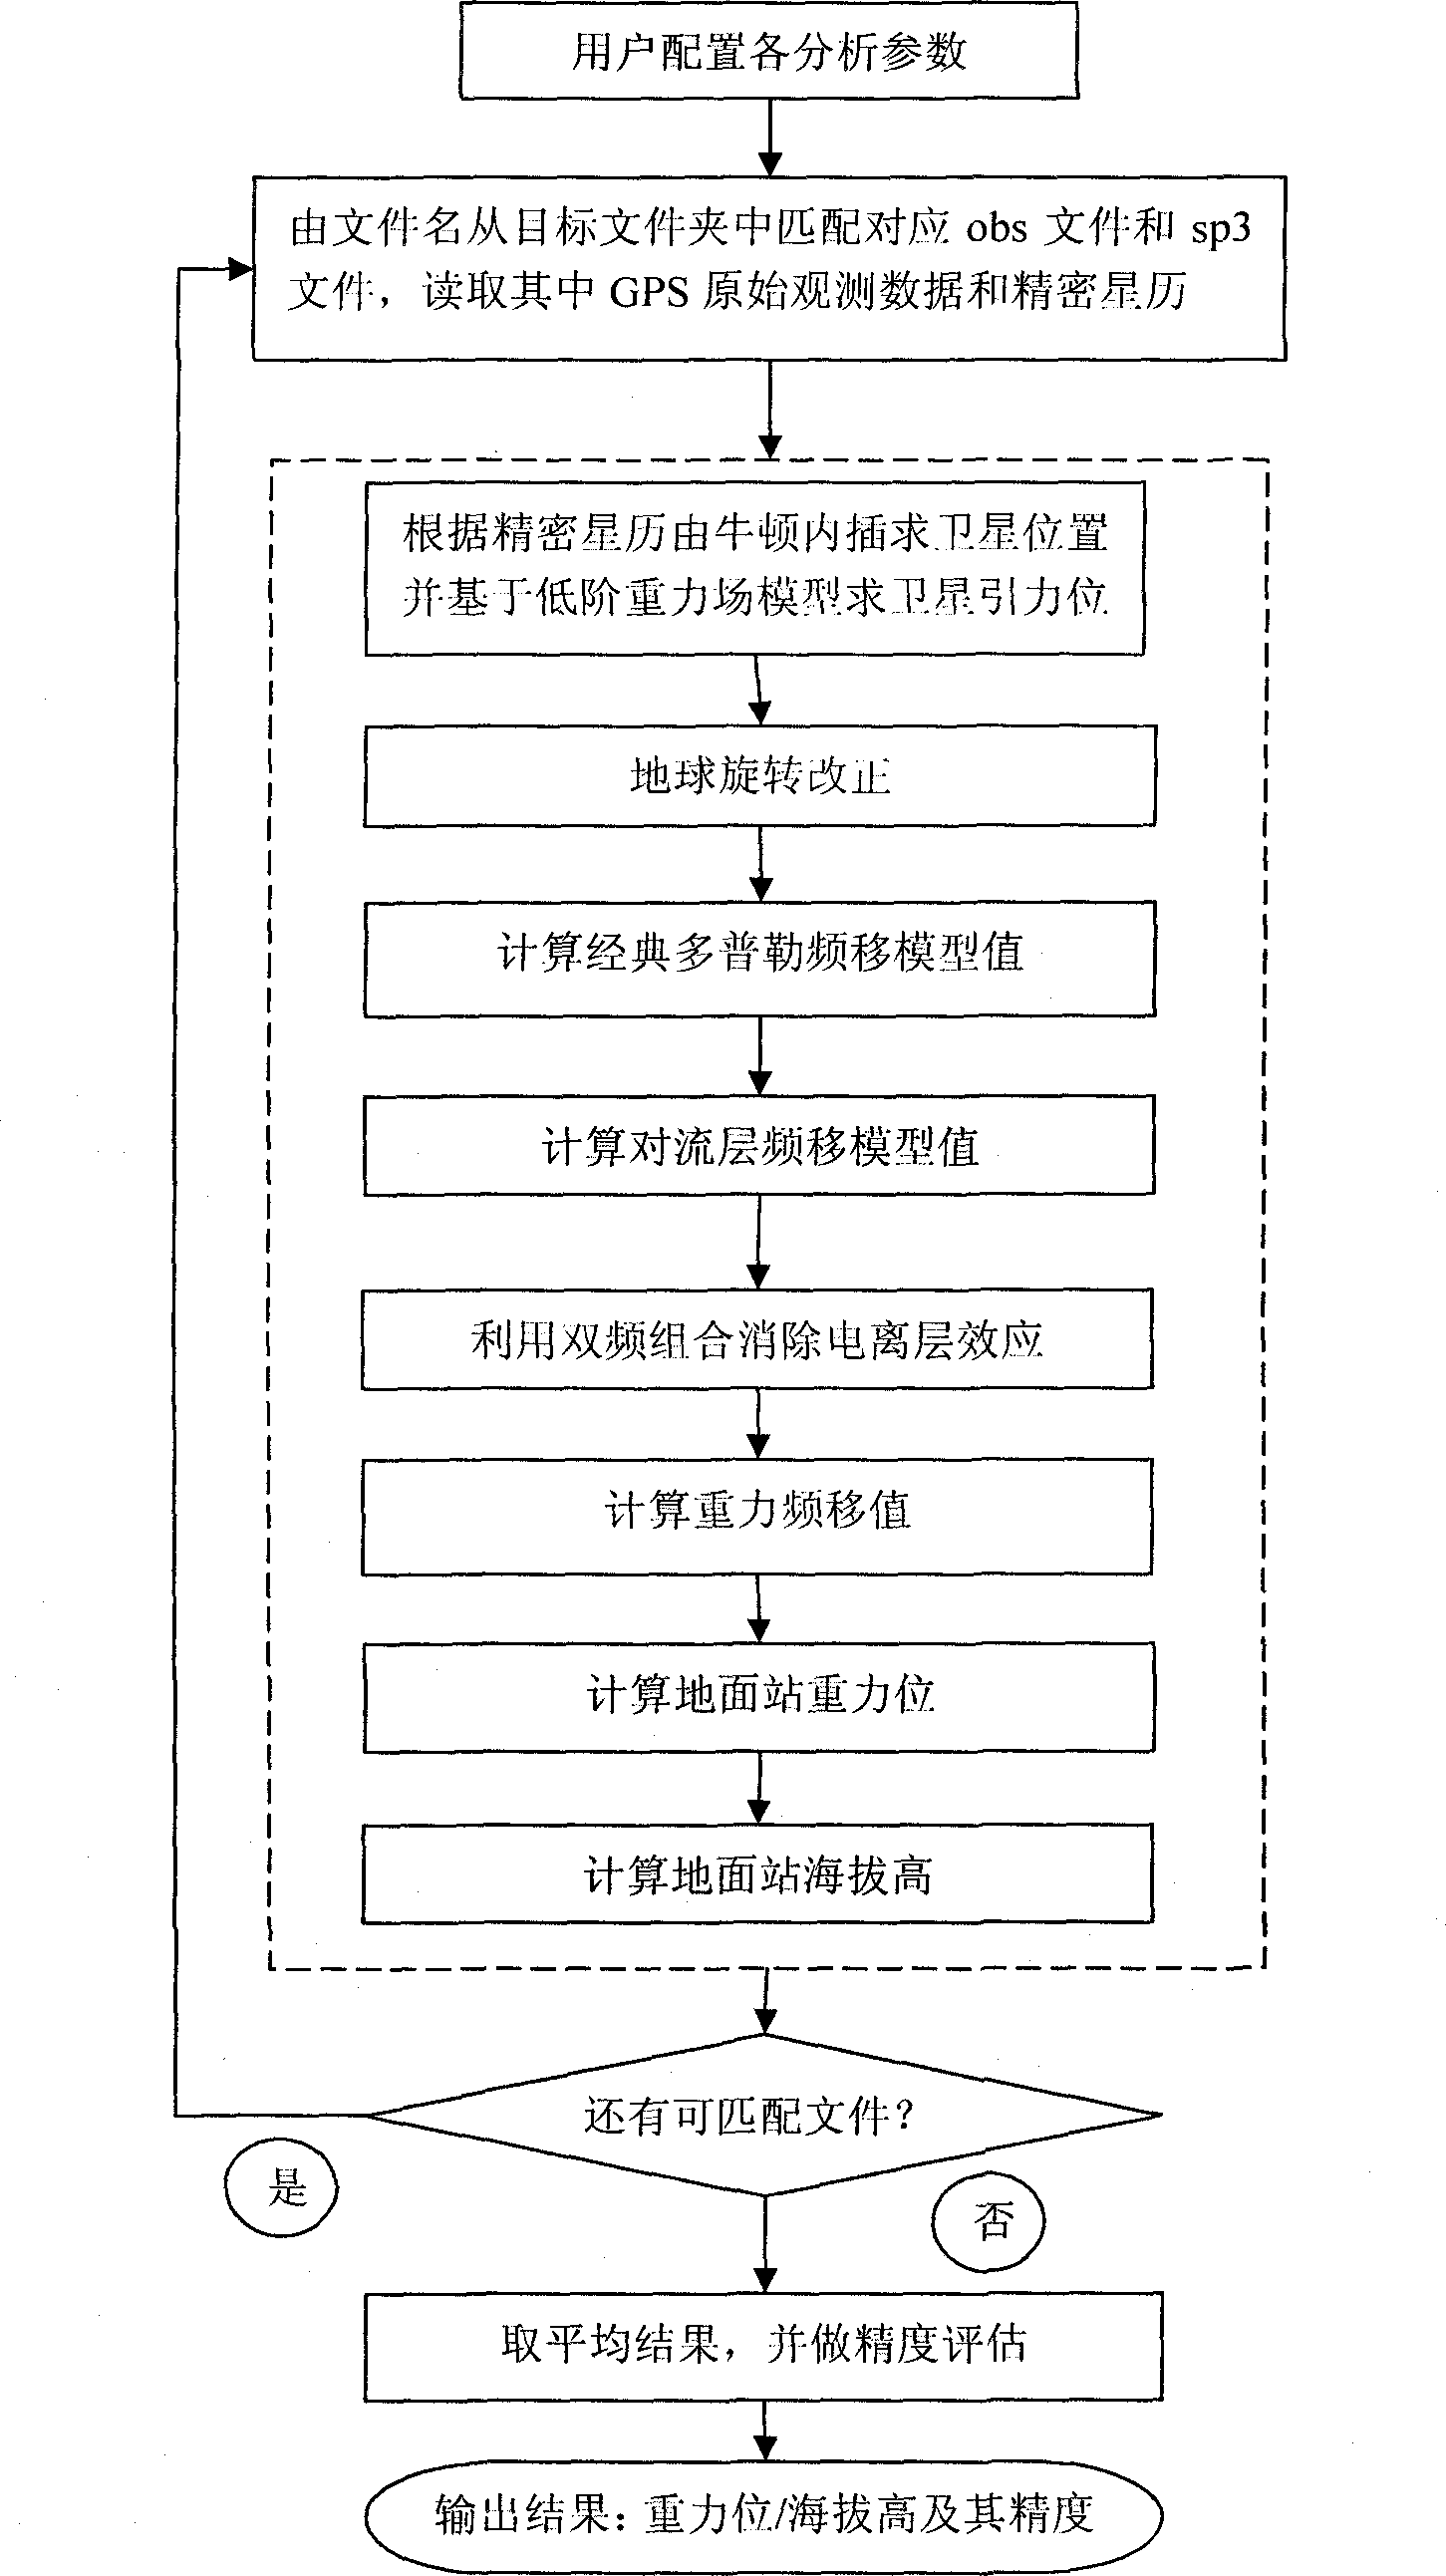 Method and device for determining seal level elevation by extracting GPS (Global Position System) signal gravity frequency shift